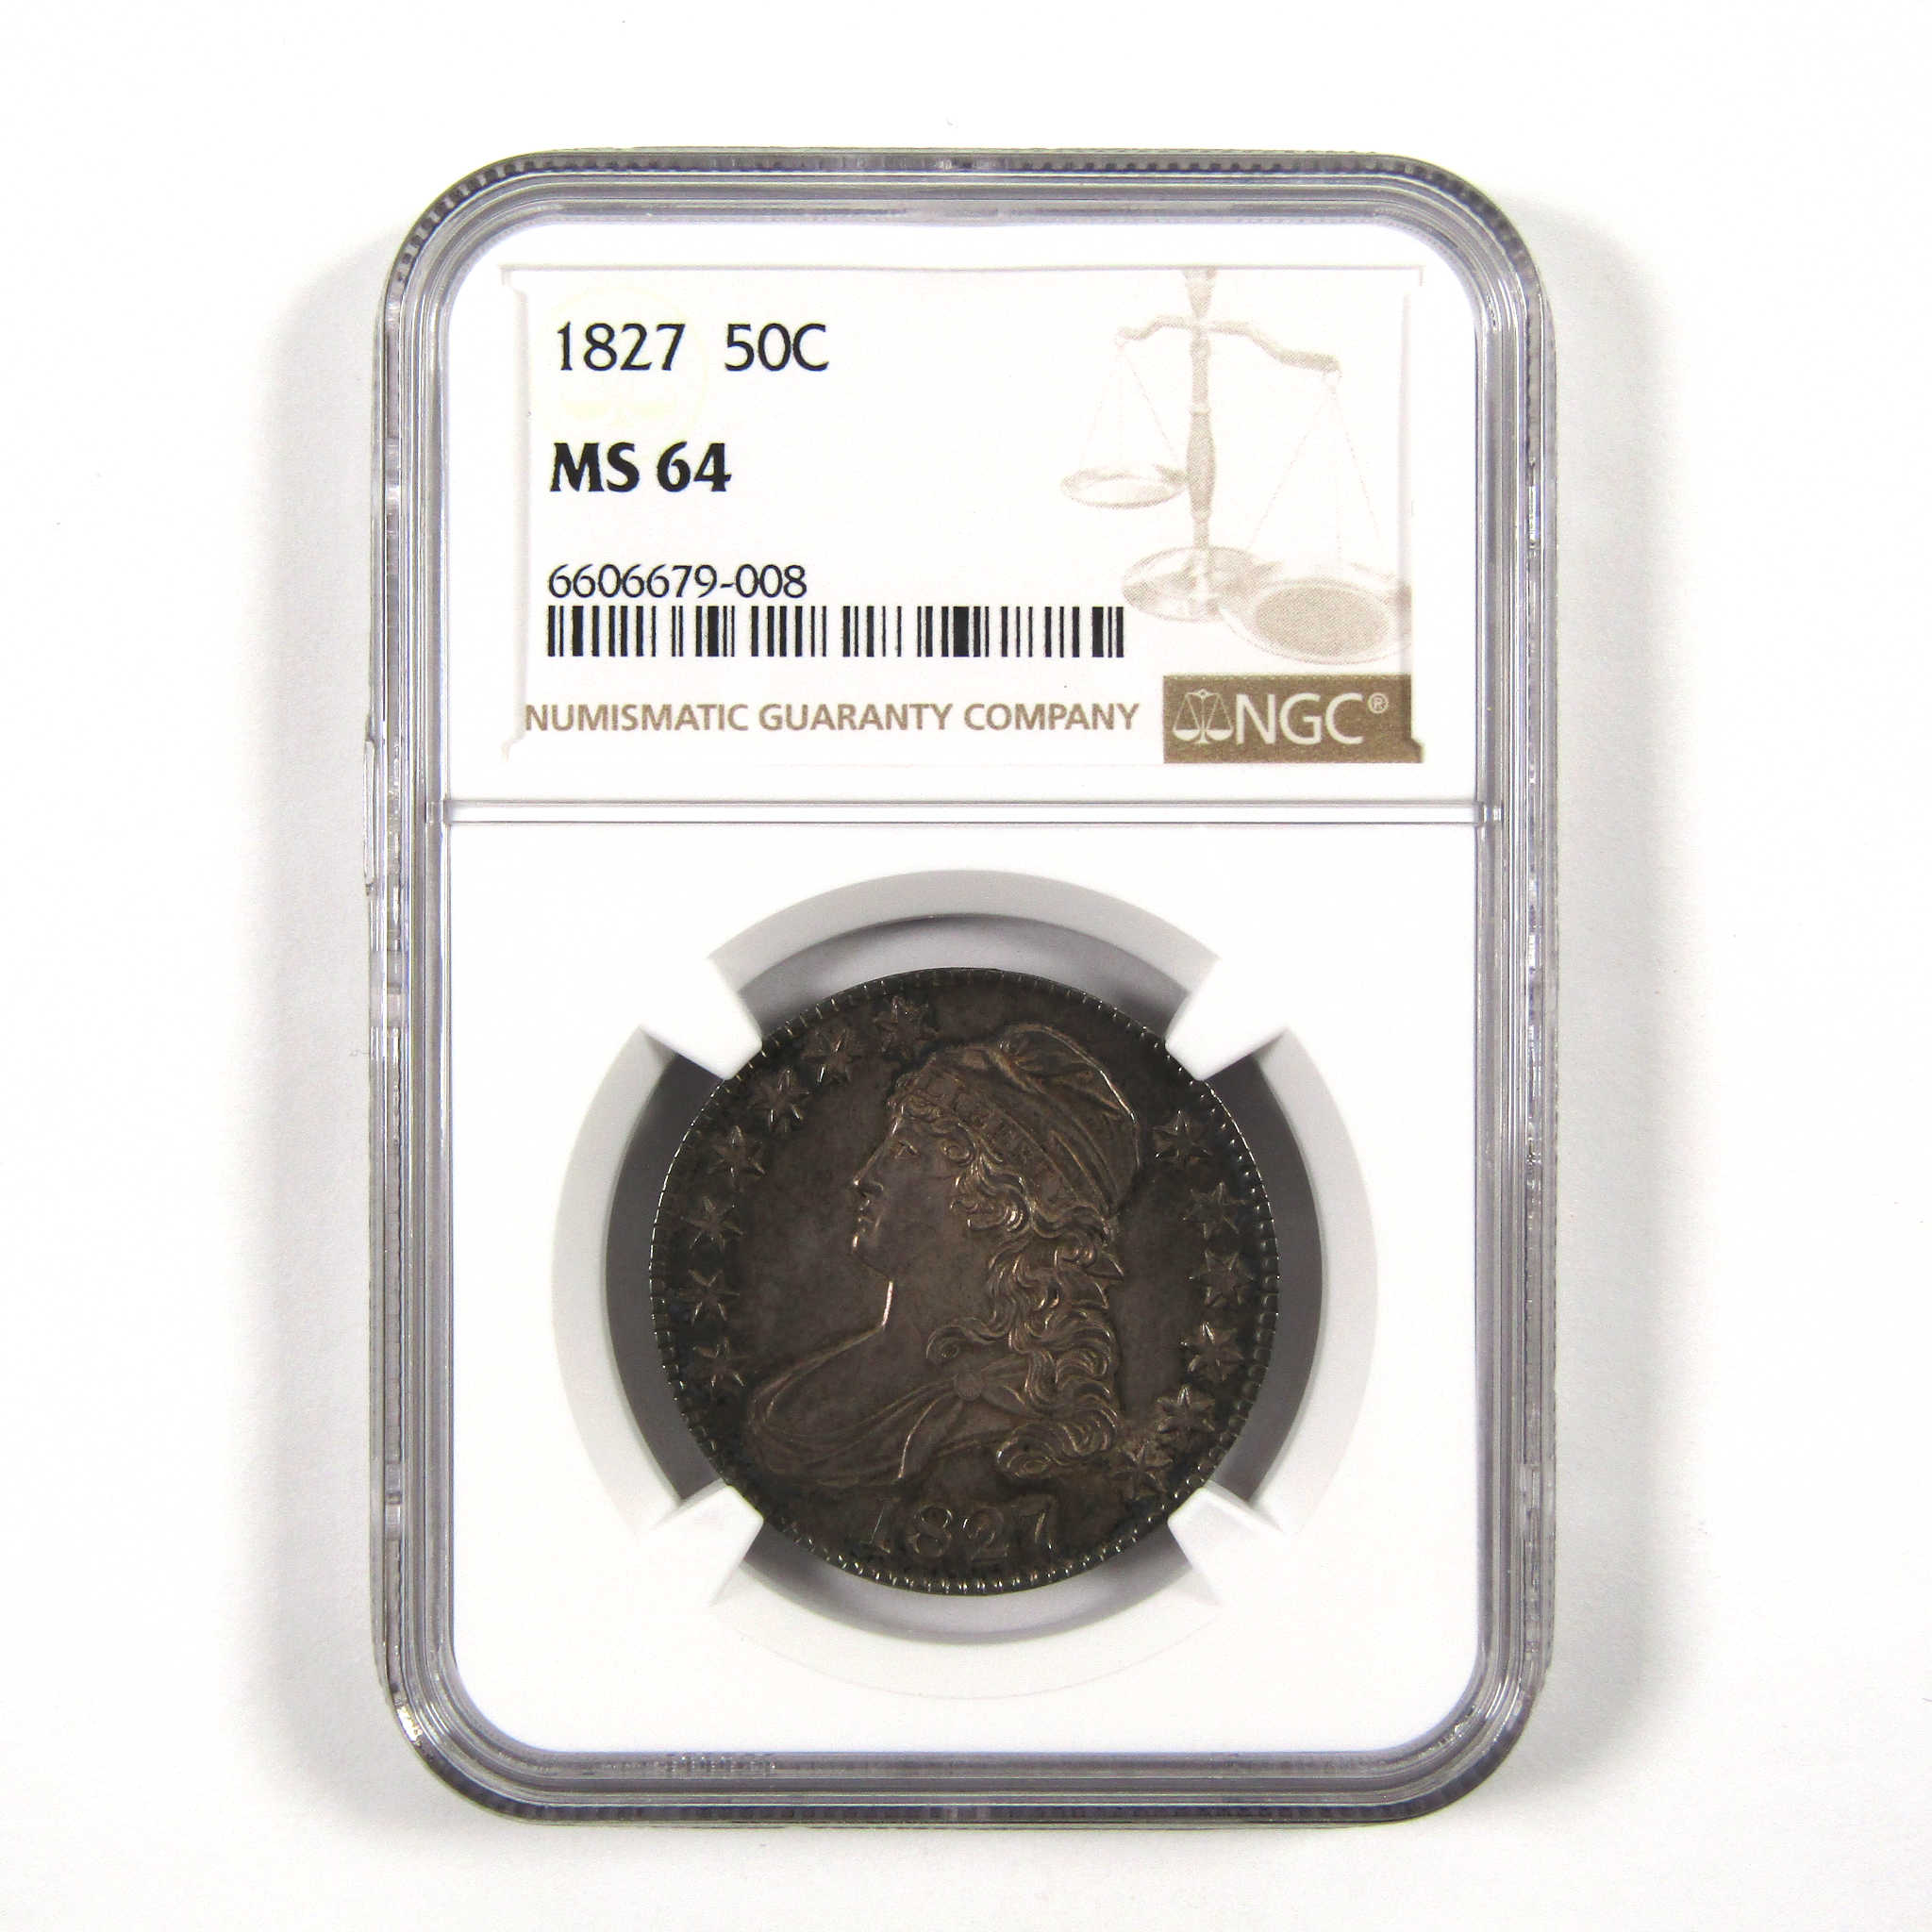 1827 Capped Bust MS64 NGC 89.24% Silver 50c Unc SKU:I9143